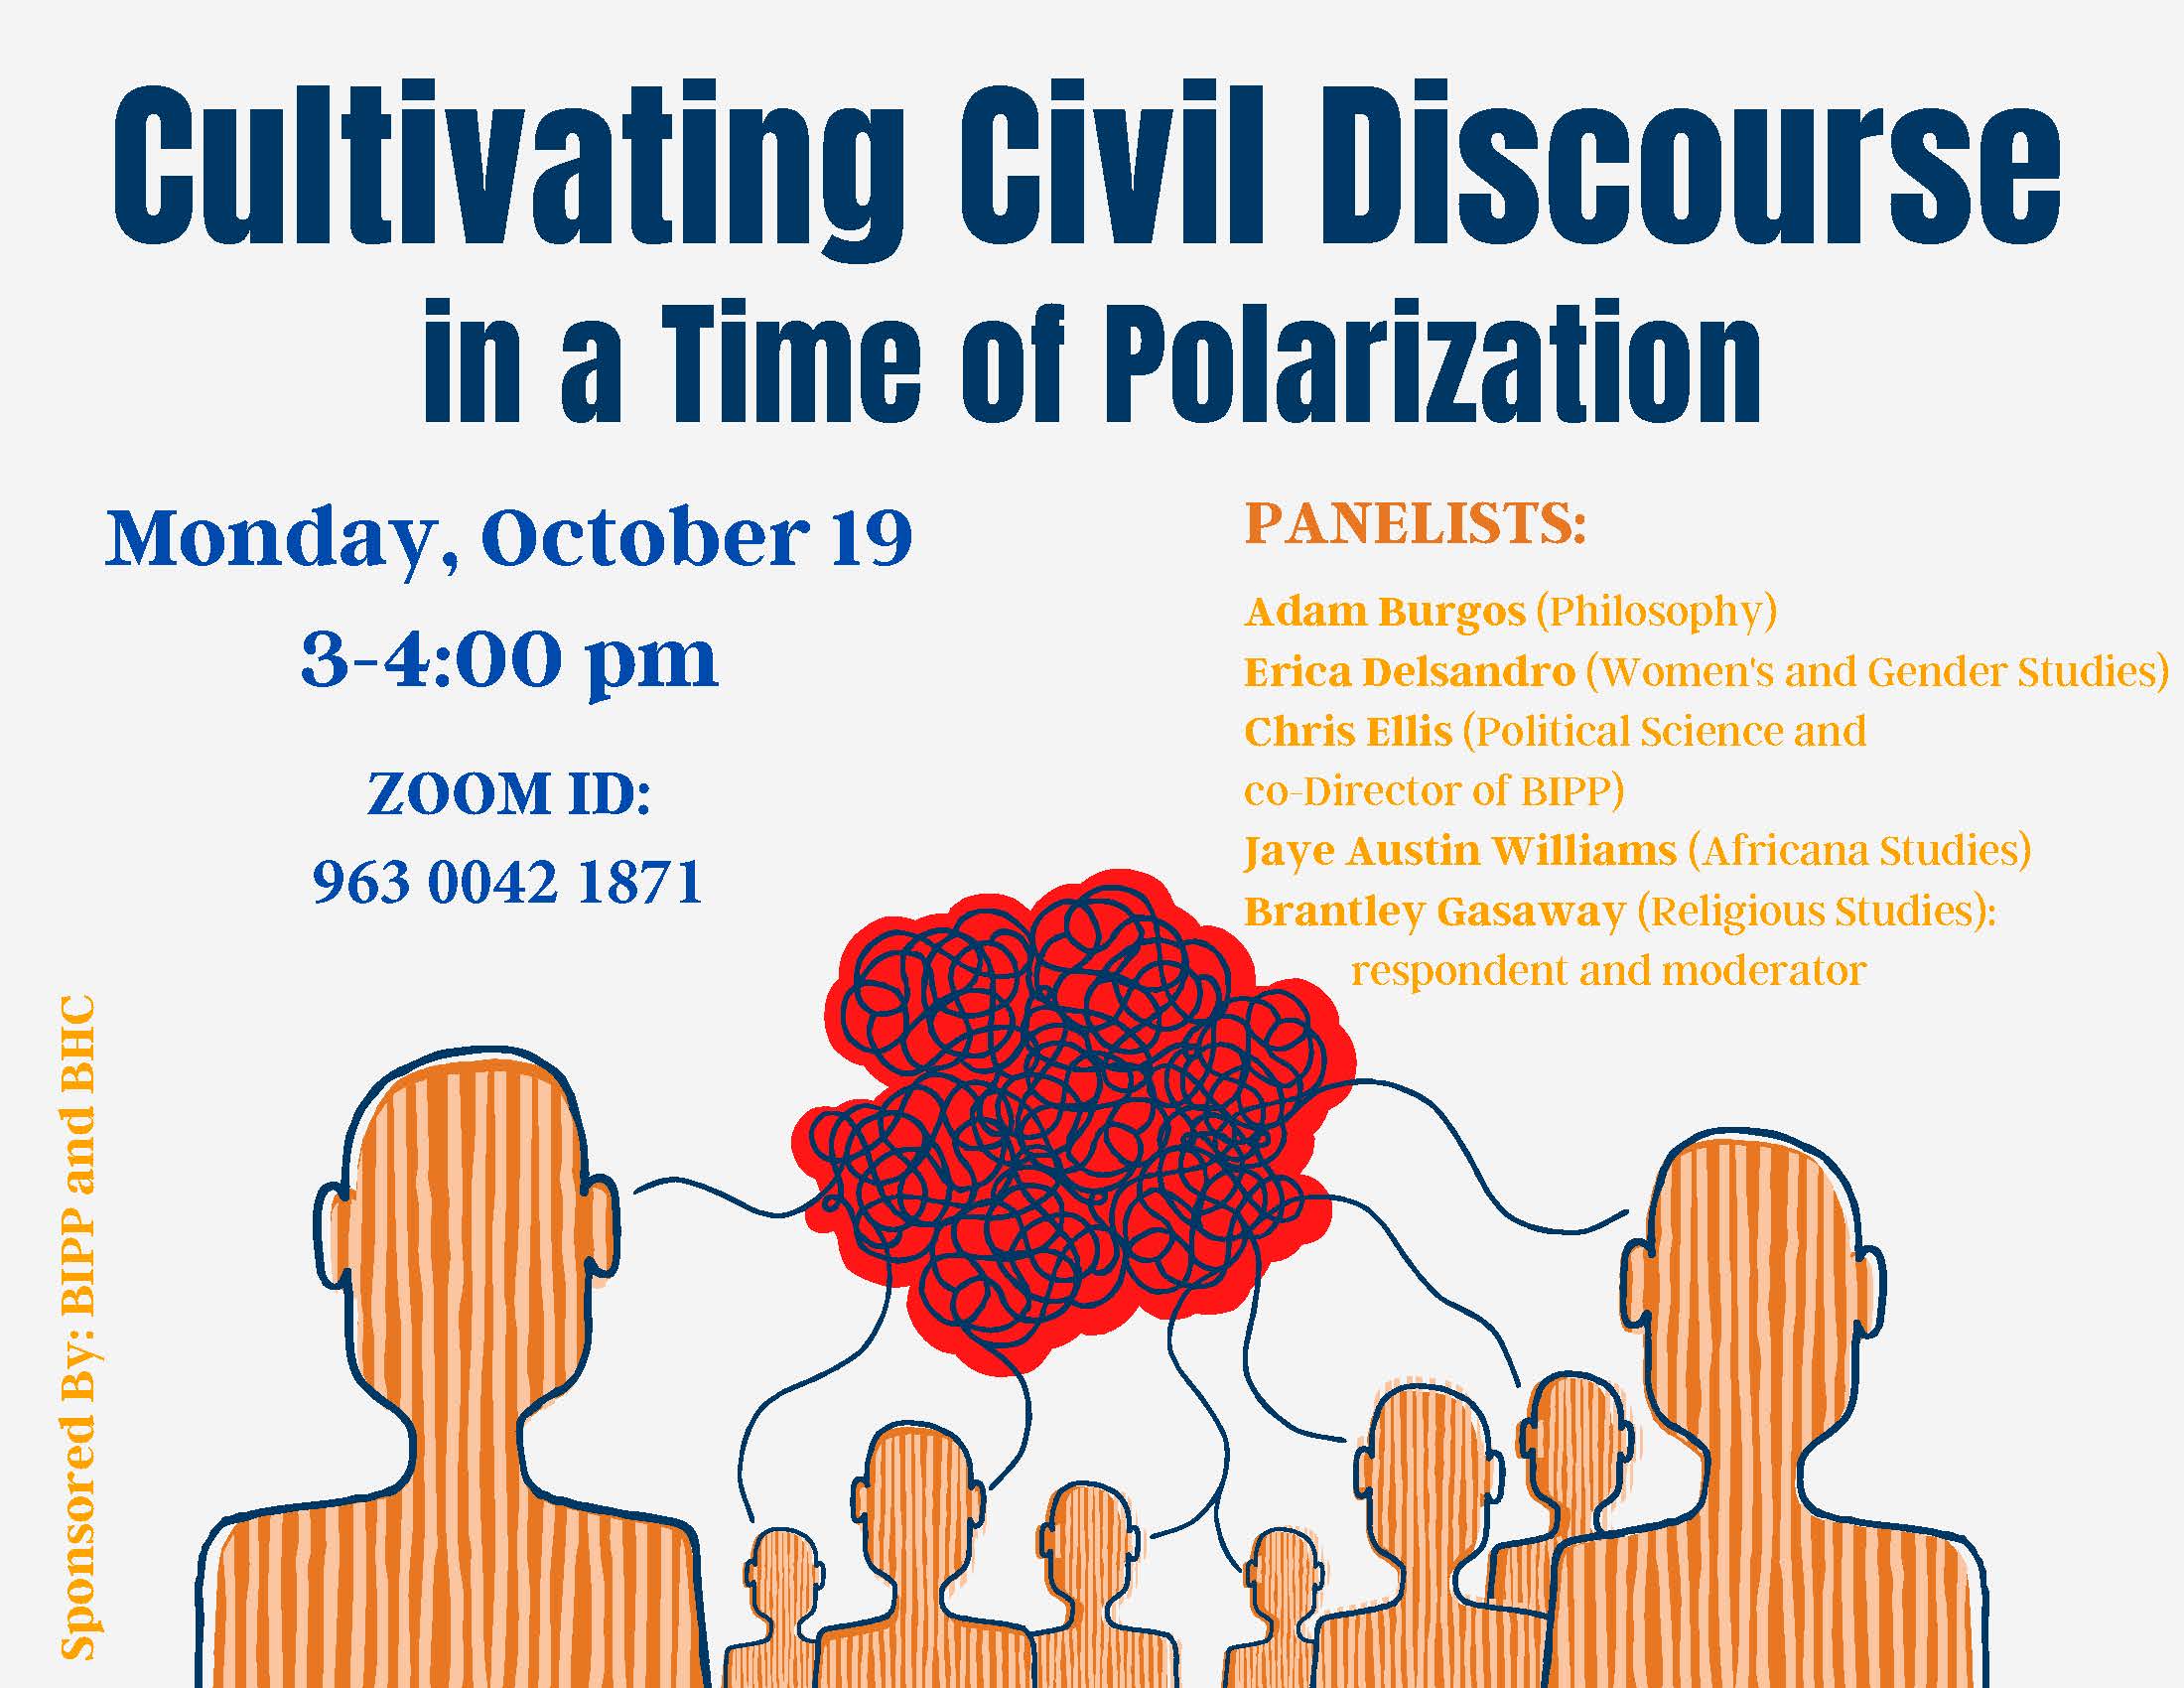 Cultivating Civil Discourse Monday October 19th at 3pm